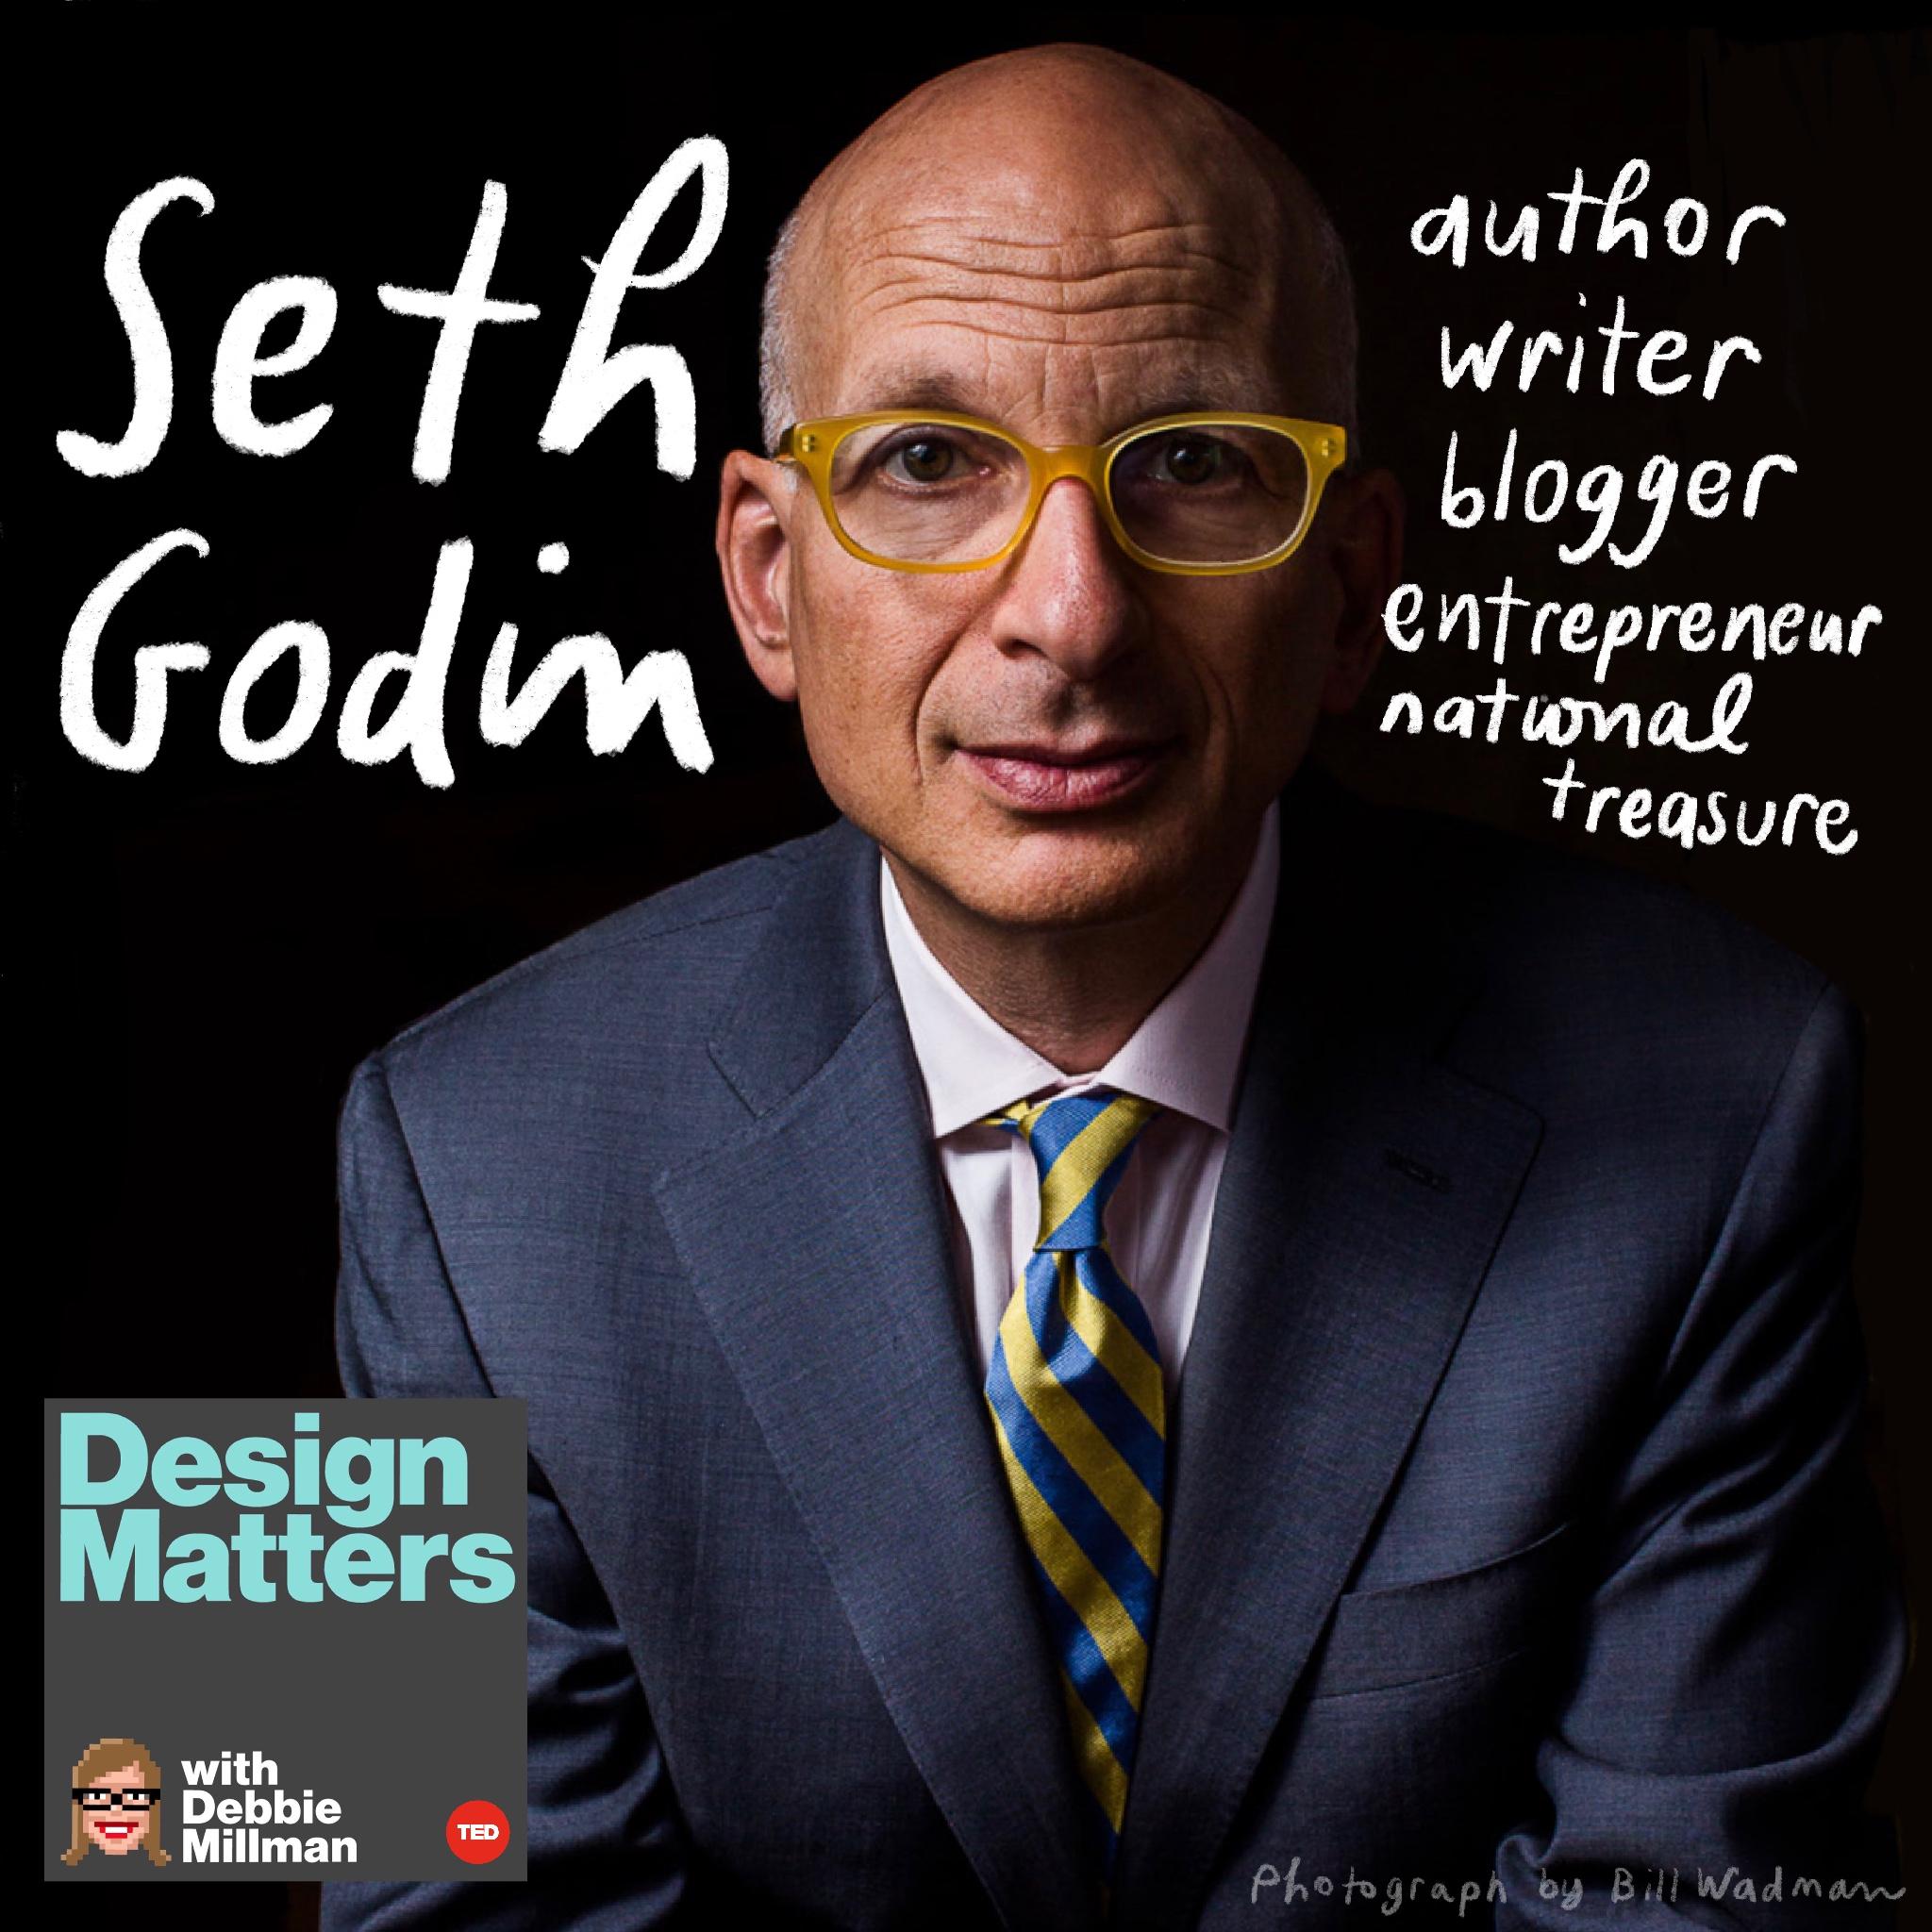 Thumbnail for "Design Matters From the Archive: Seth Godin".